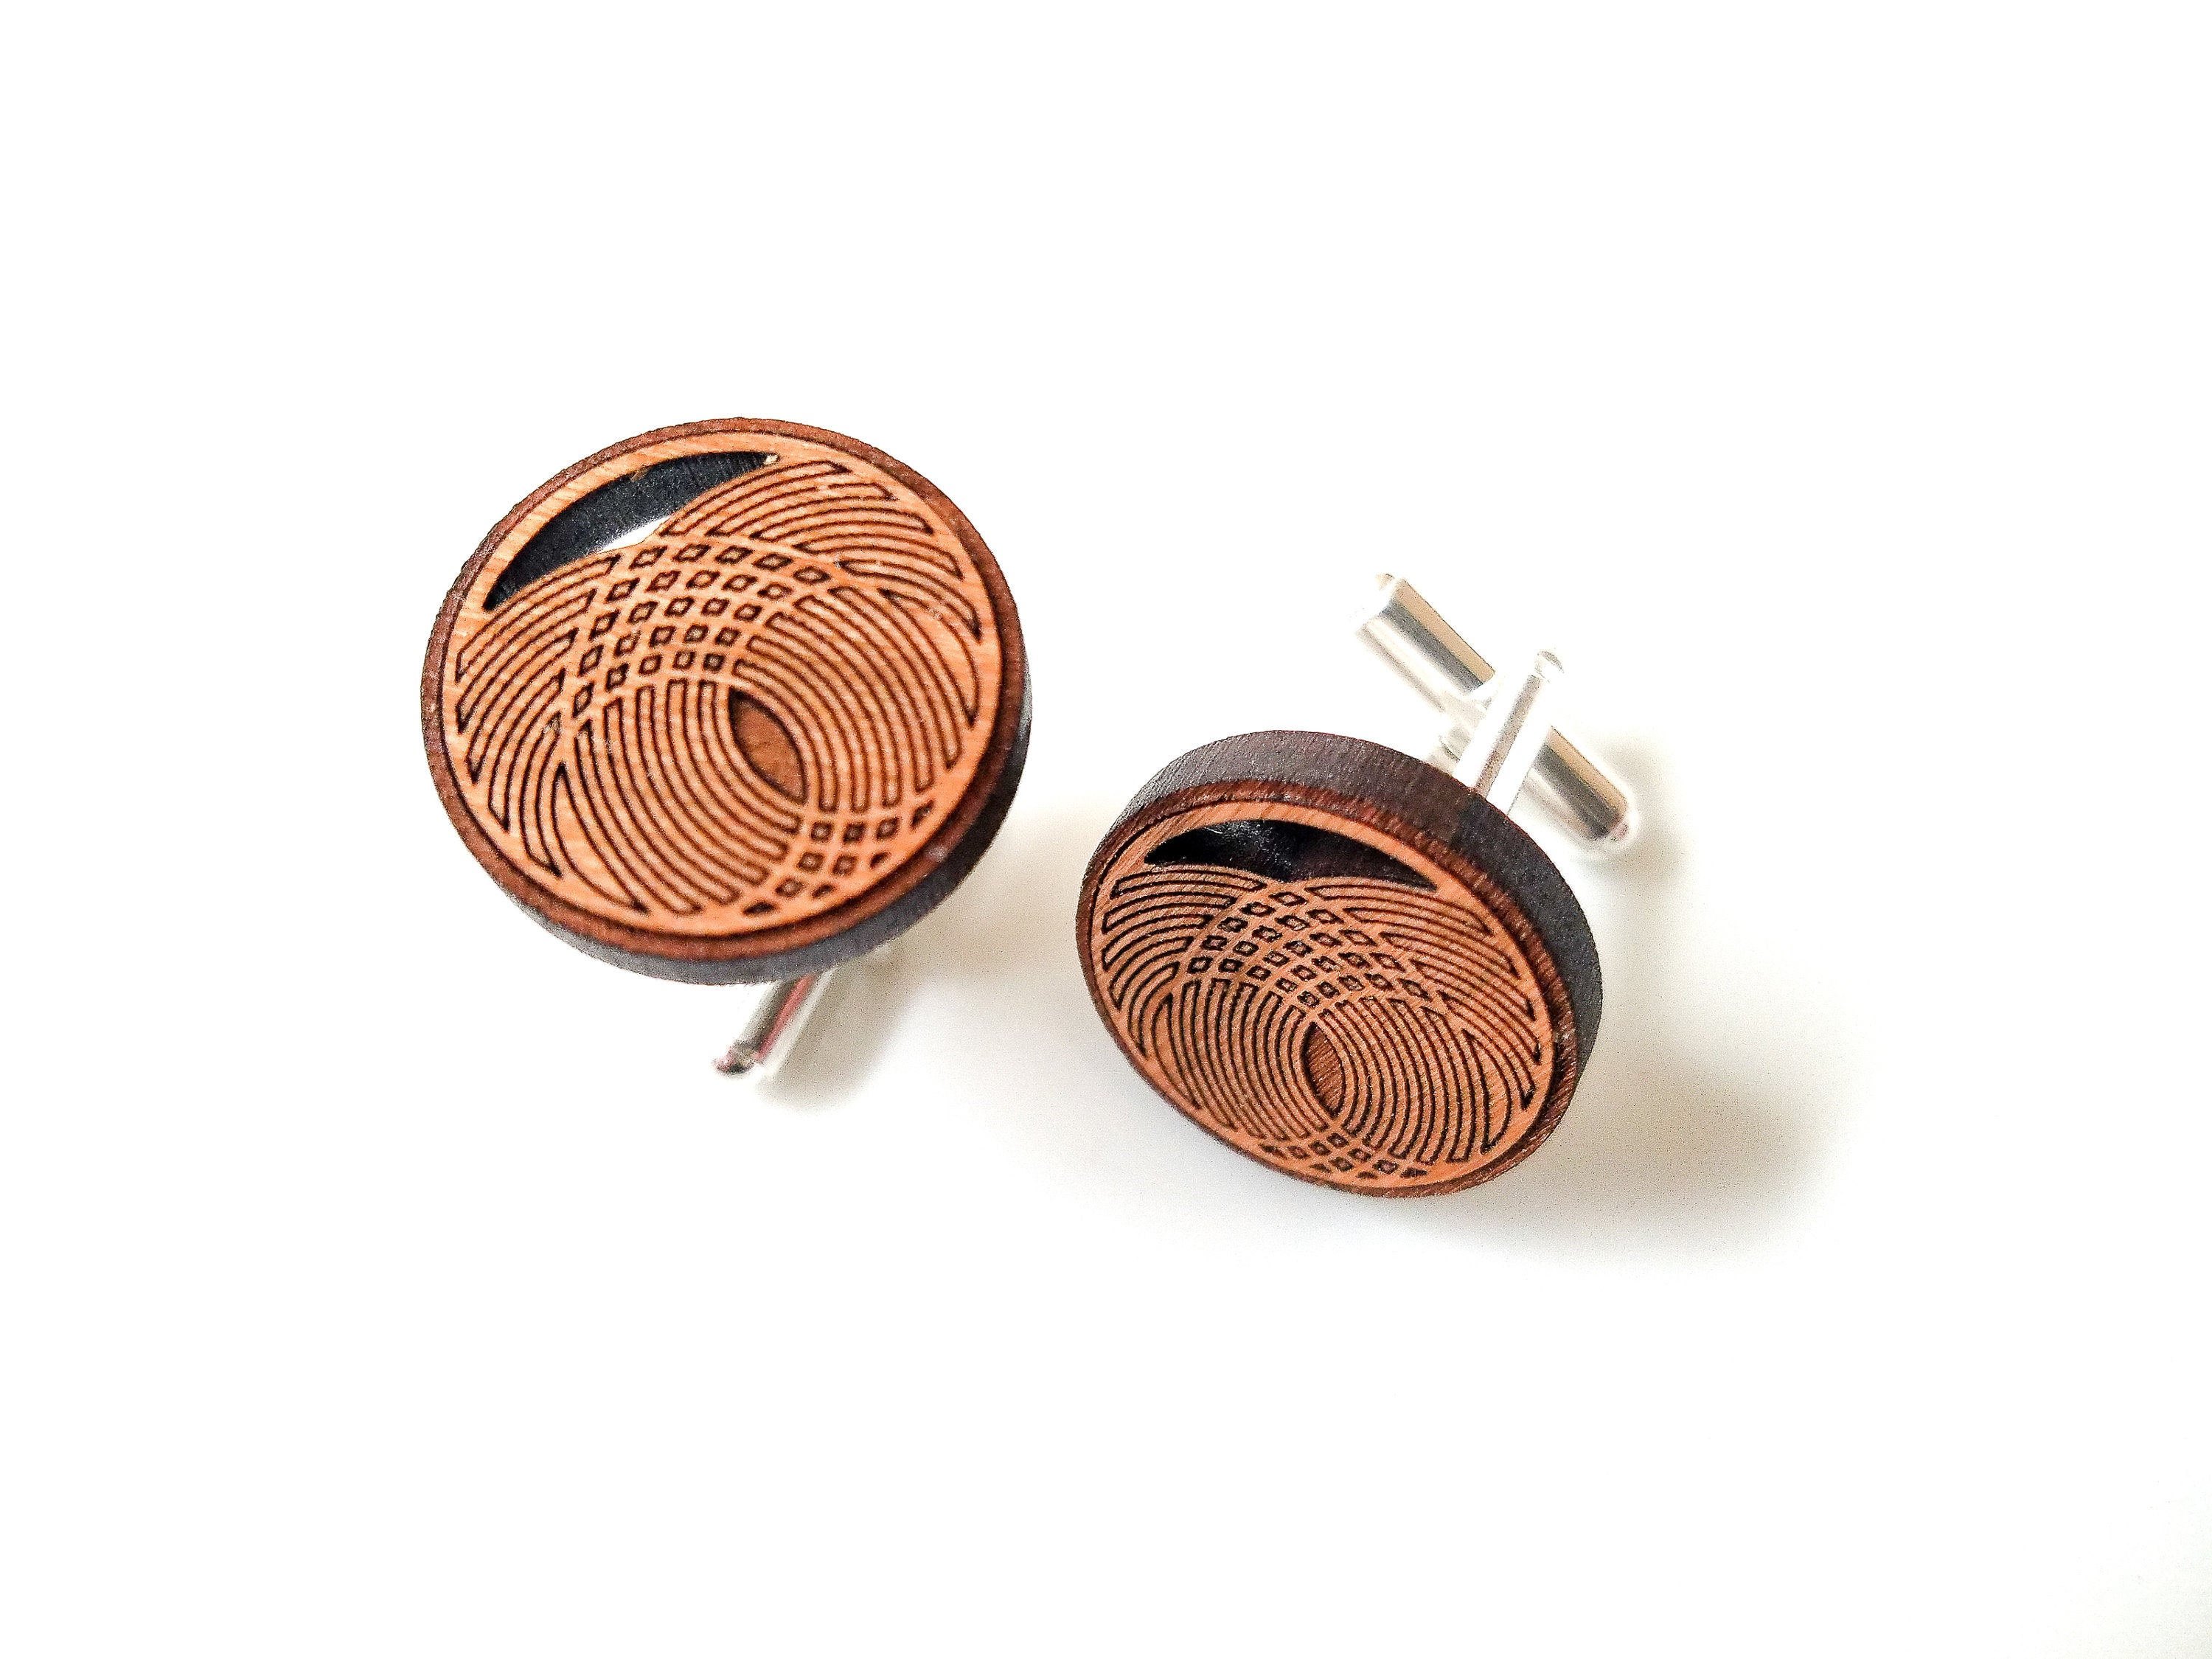 Cherry Wood Cufflinks - The Perfect Gift for the Groomsman in Your Bridal Party